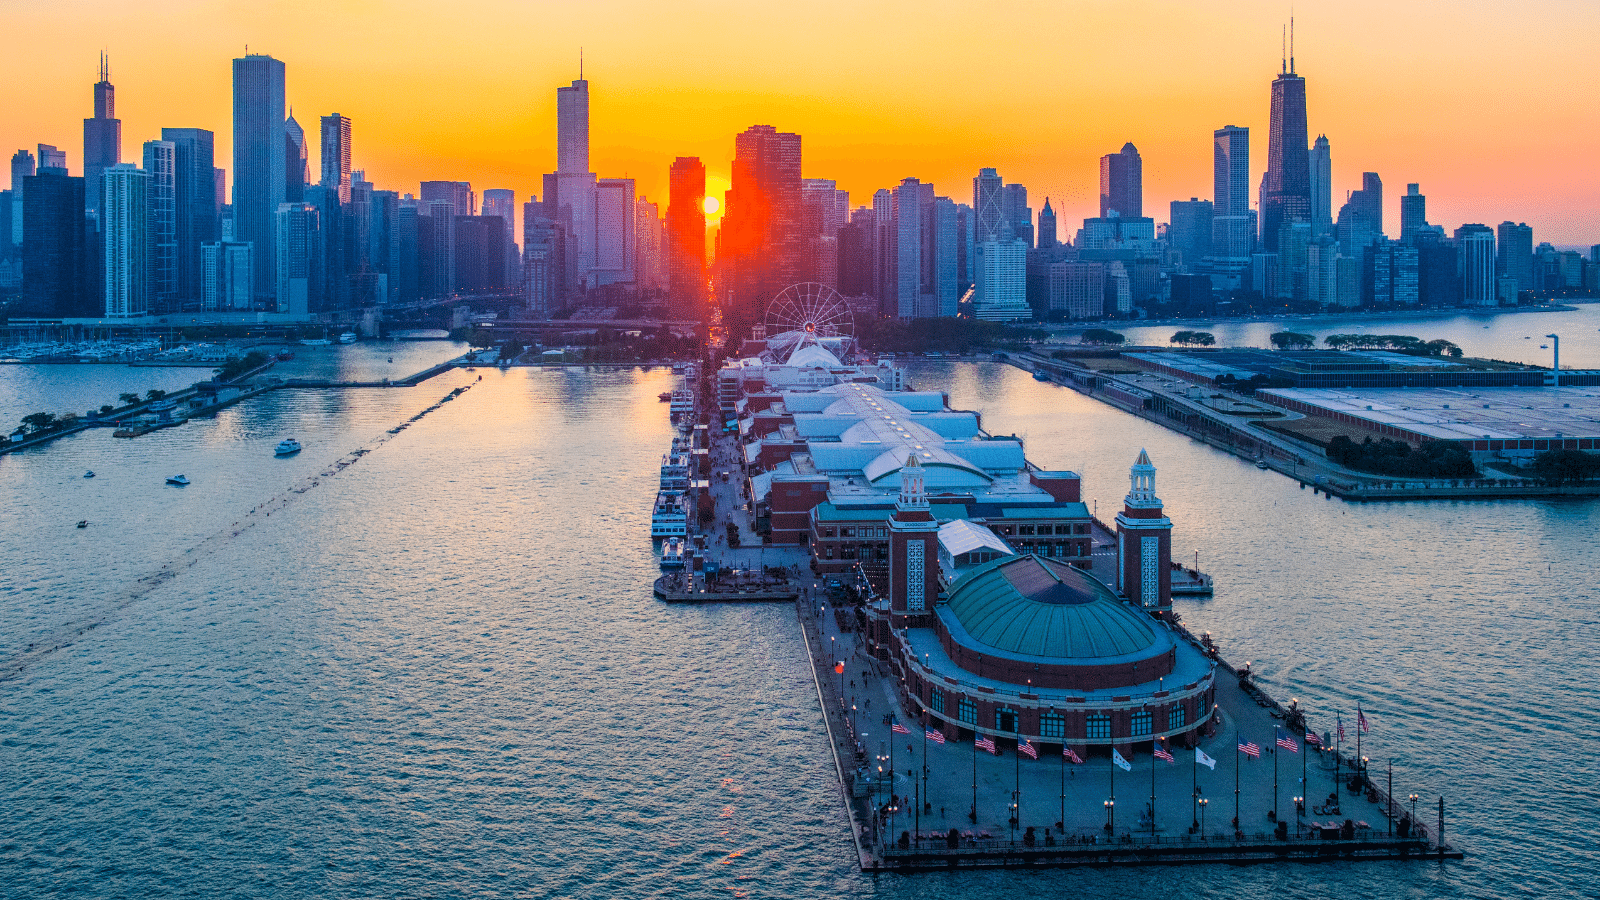 Hosts Global | Chicago Navy Pier and skyline